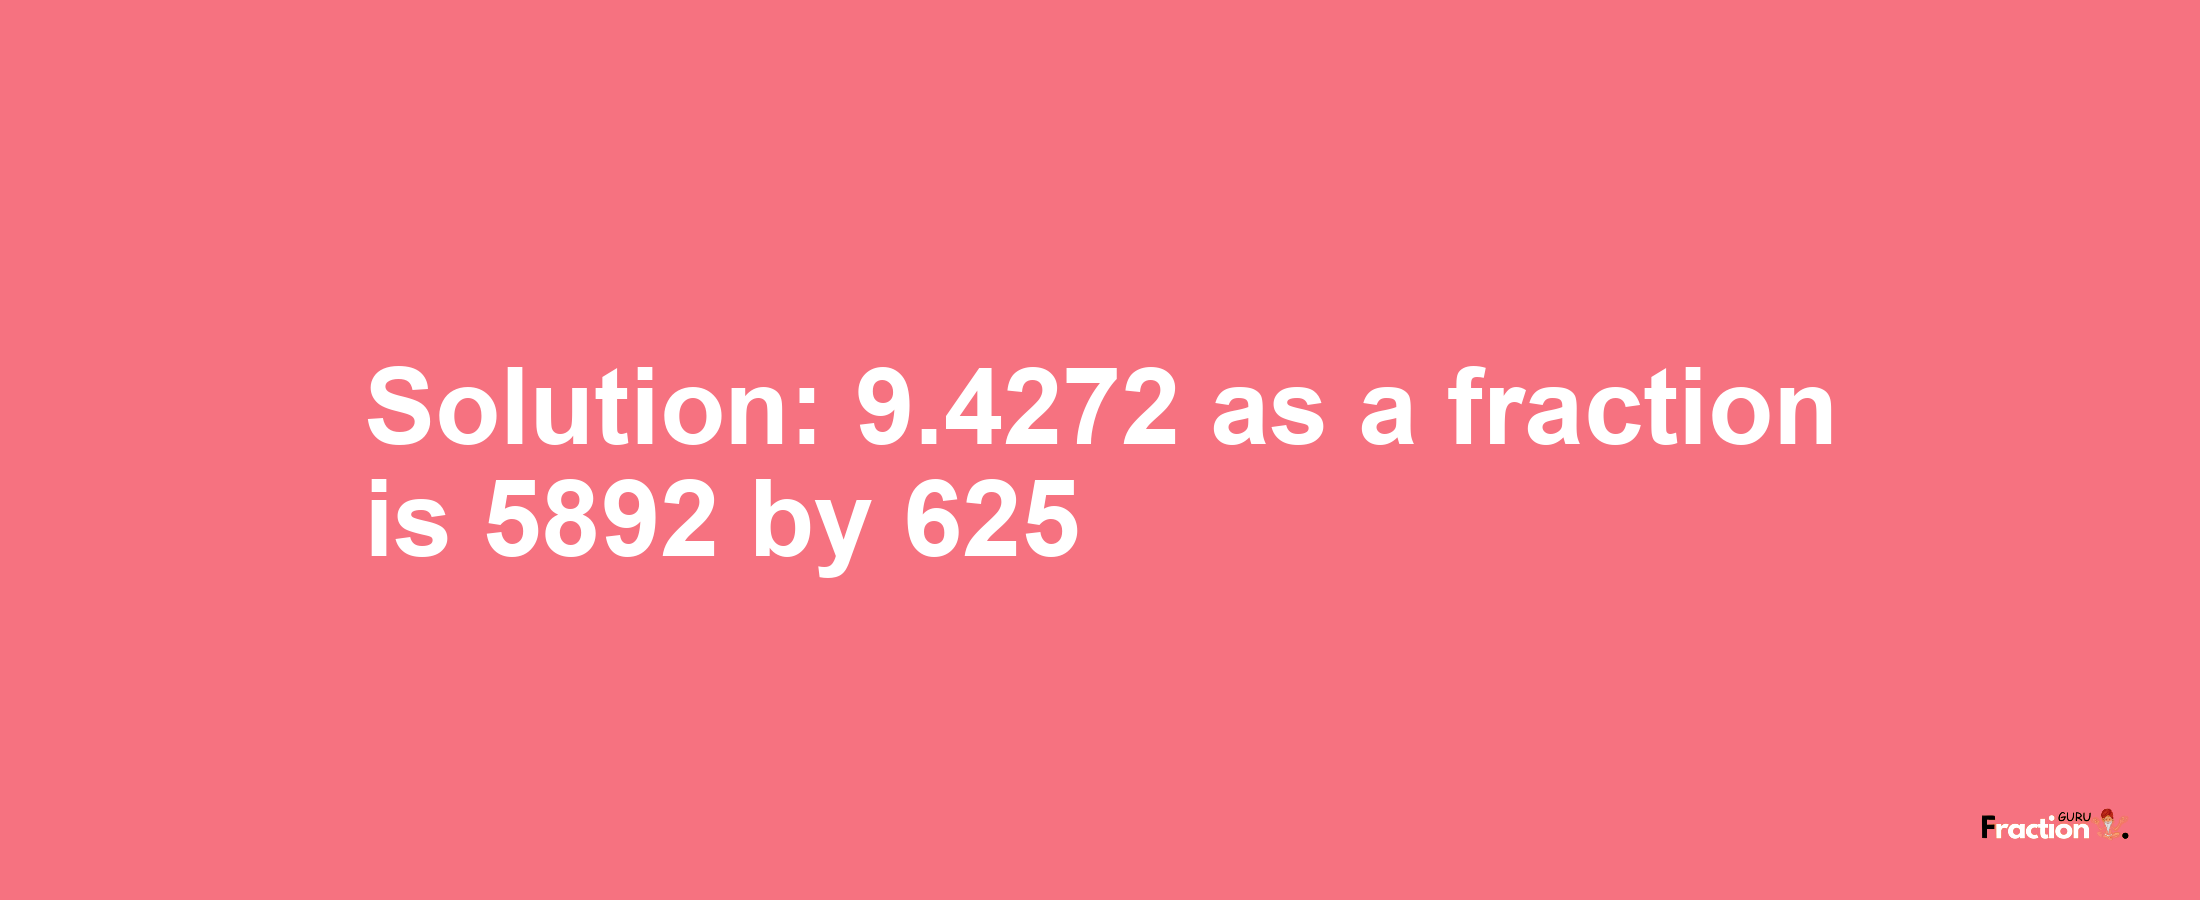 Solution:9.4272 as a fraction is 5892/625